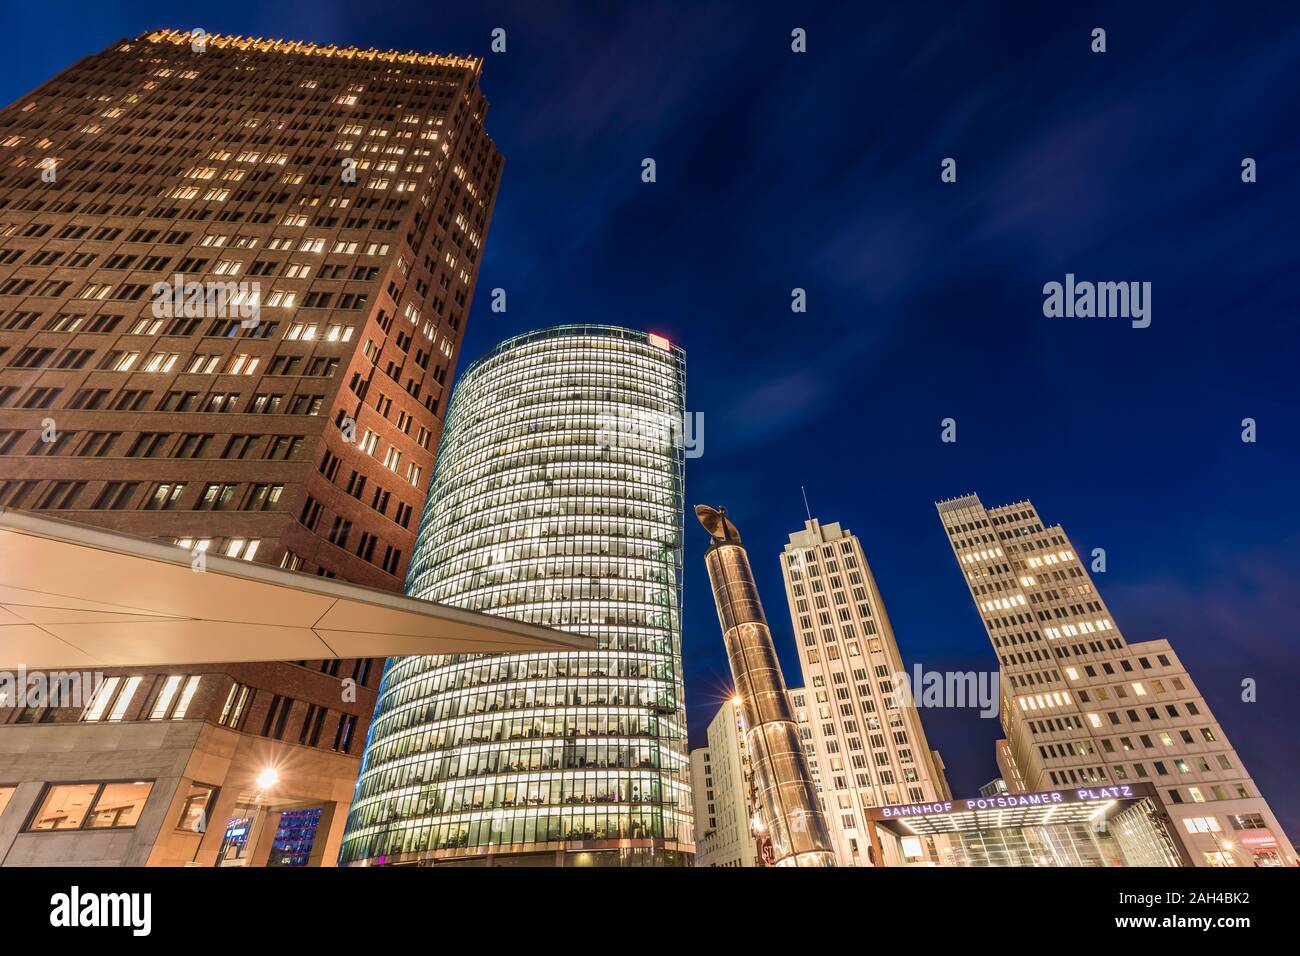 Germany, Berlin, Mitte, Potsdamer Platz, Kollhoff-Tower, Bahntower, Beisheim-Center, Low angle view of skyscrapers at dusk Stock Photo